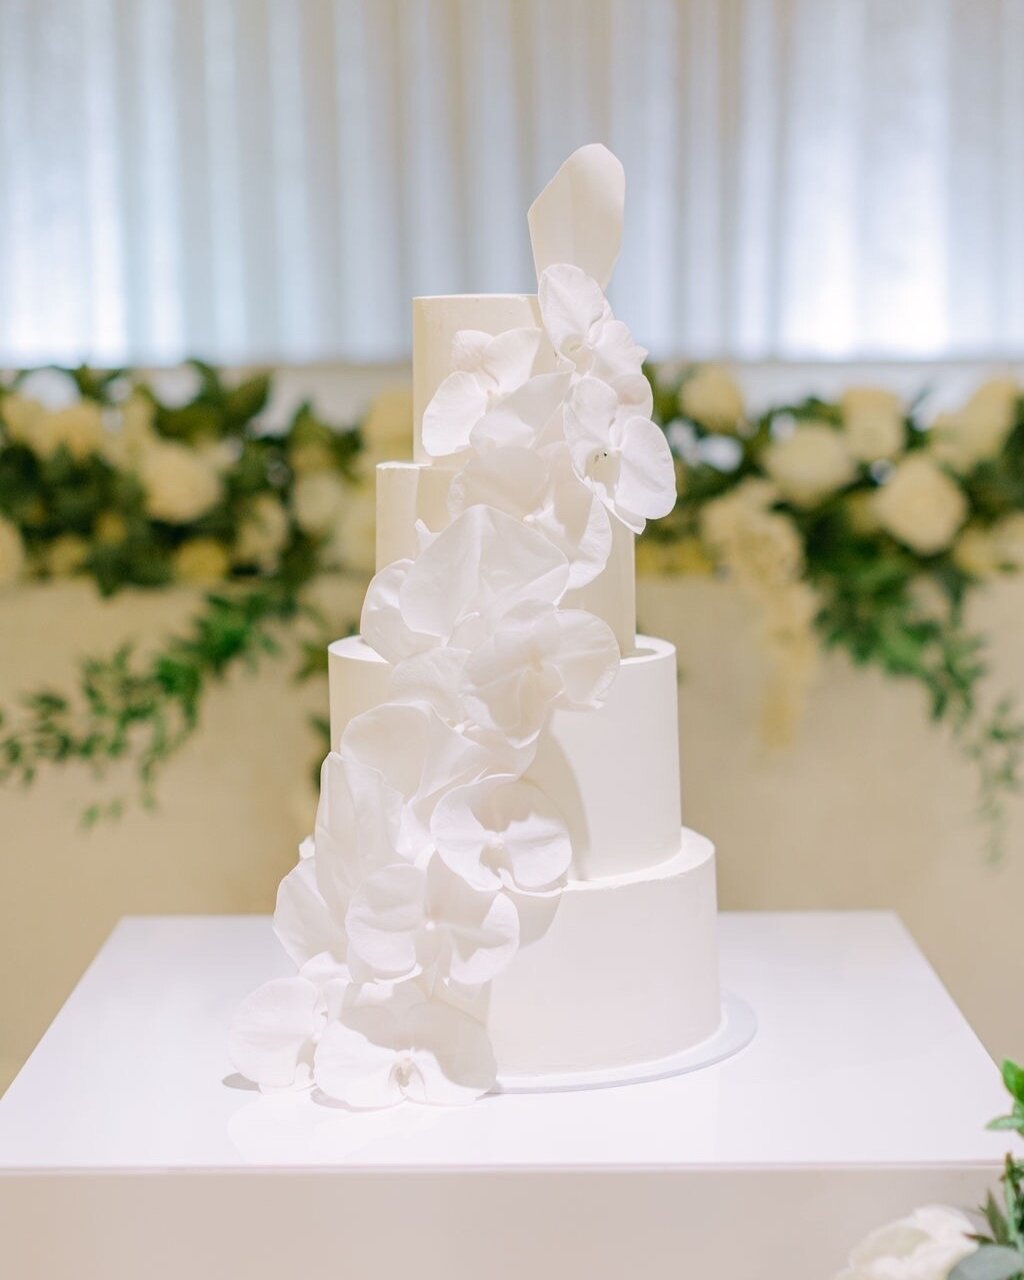 Melissa &amp; Hung 🤍 // 
4 Tiers of pure love, with a cascade of orchids and wafer paper 🤍
All Tiers different flavours, Blueberry Lemon, White Chocolate &amp; Almond. Nutella Pretzel and Coconut &amp; Finger lime 🤍

Team;
Stylist - @Vickyrahmicev